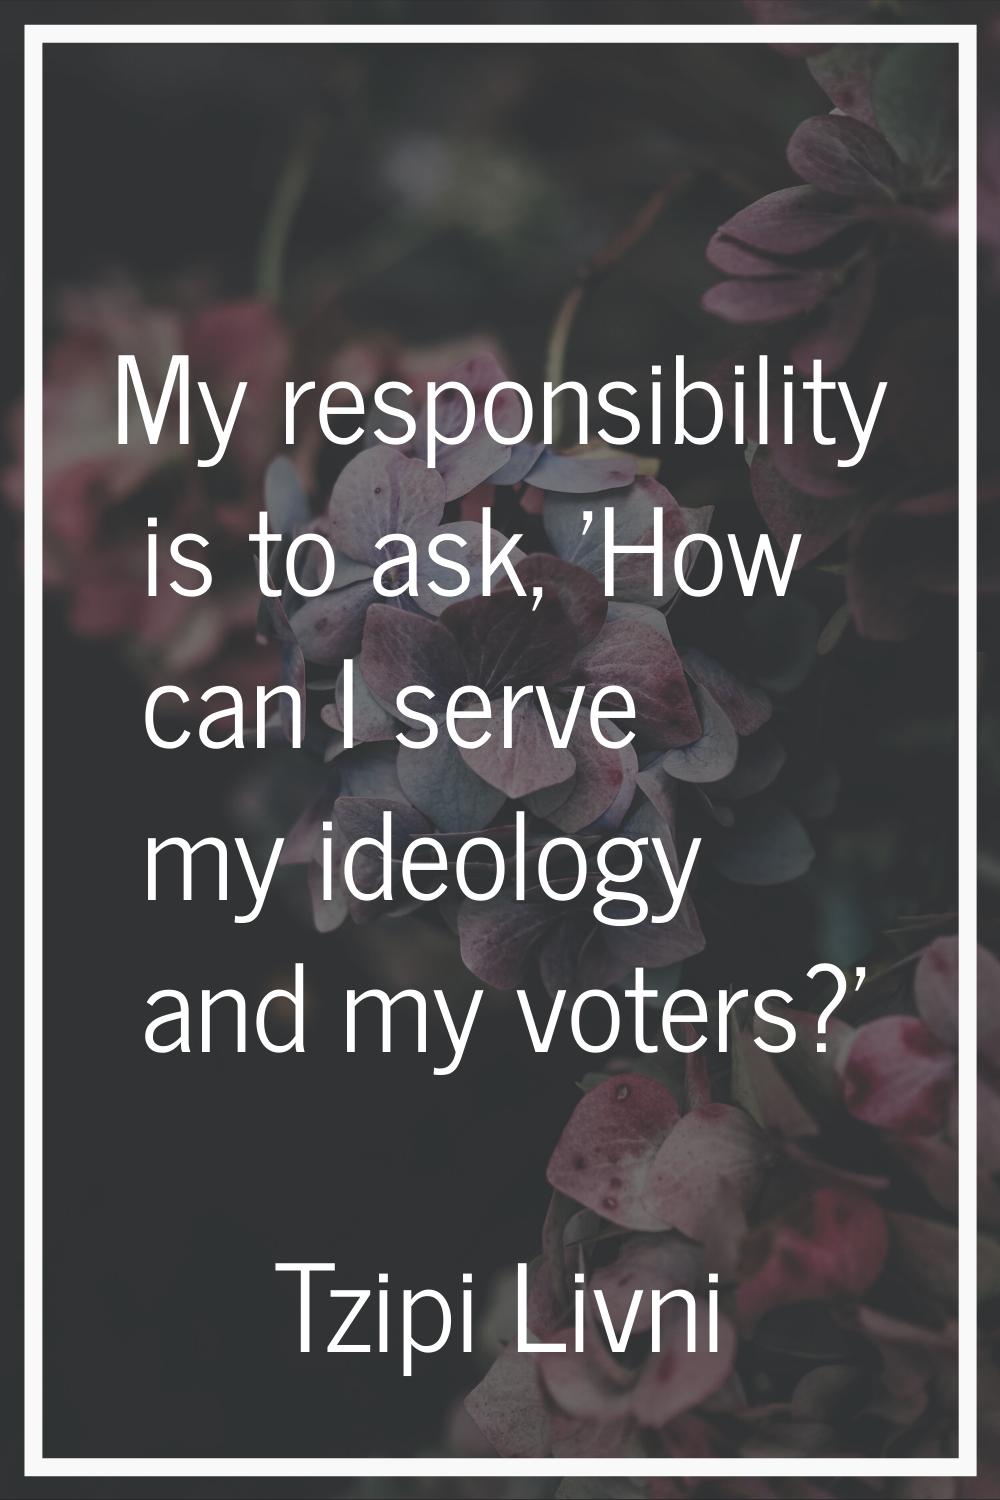 My responsibility is to ask, 'How can I serve my ideology and my voters?'